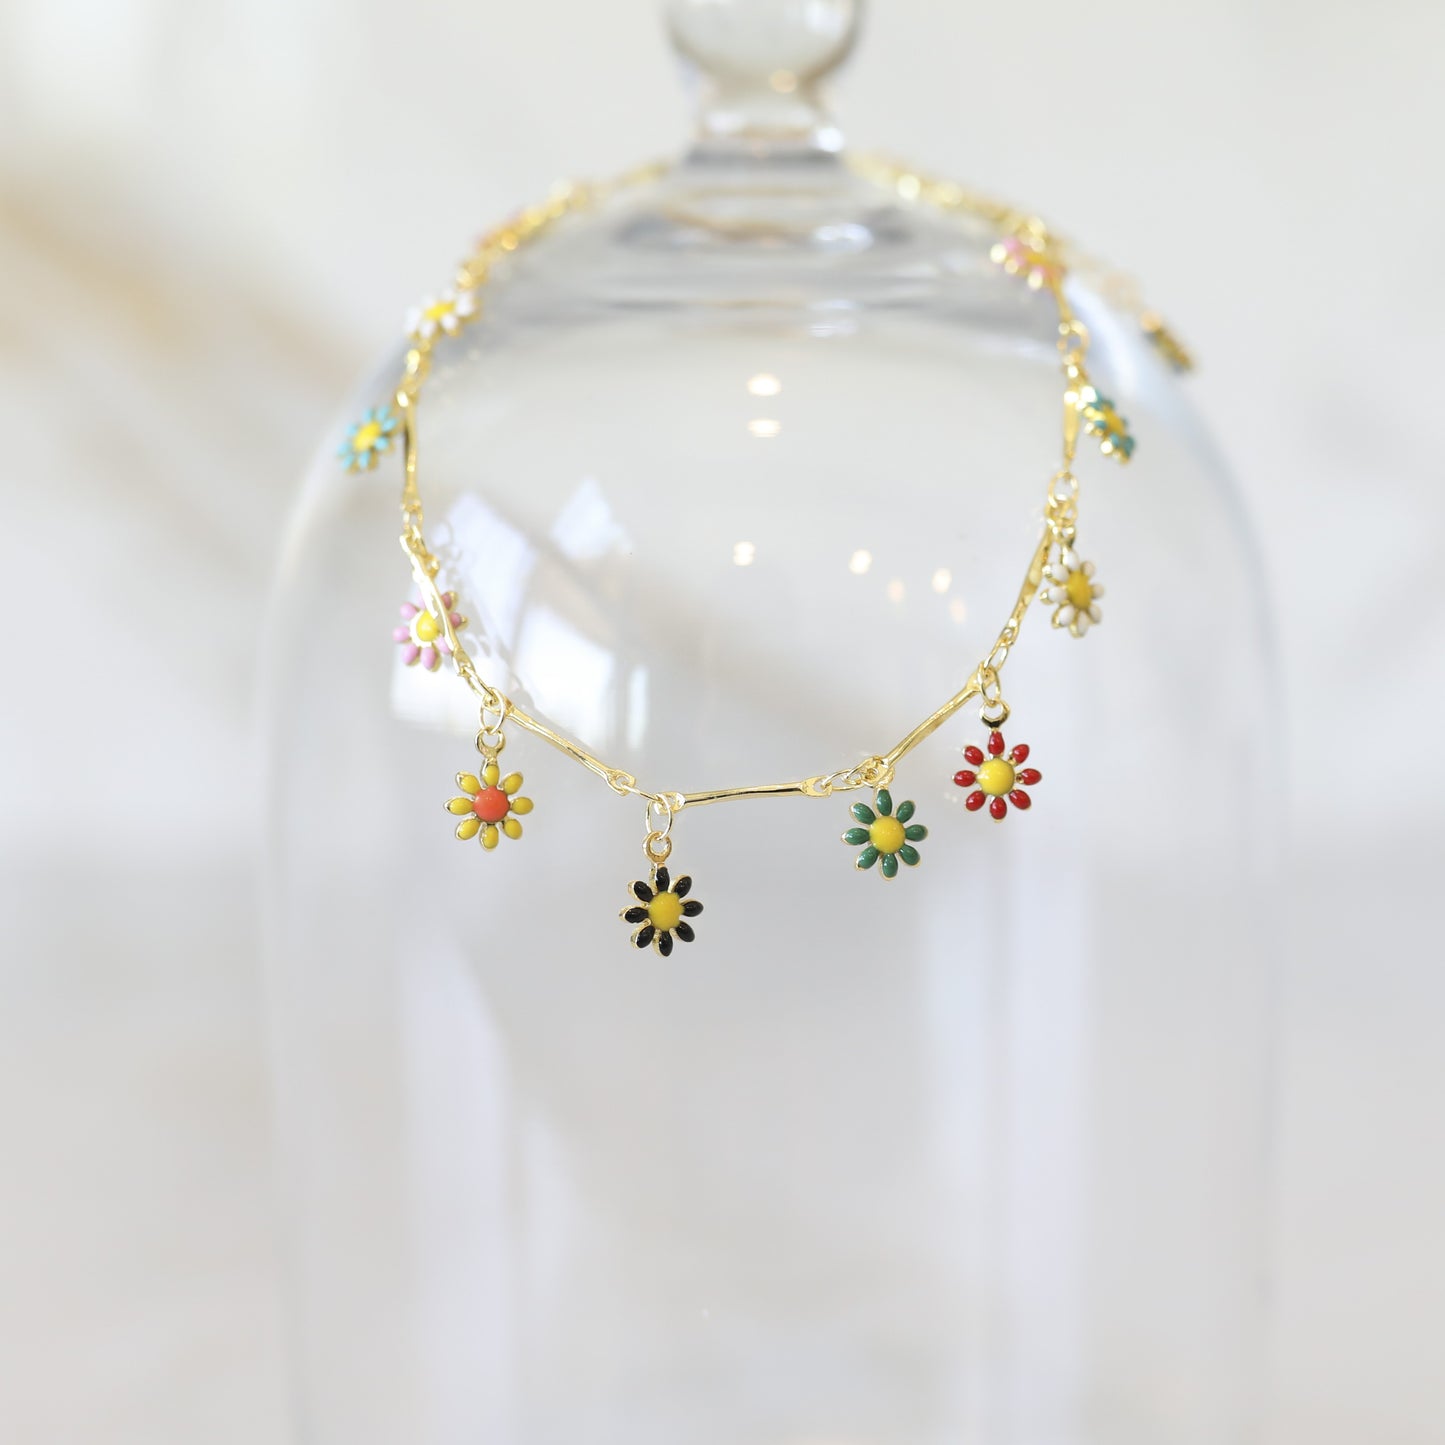 Daisy Anklet Multicolored Enamel Daisy Charms